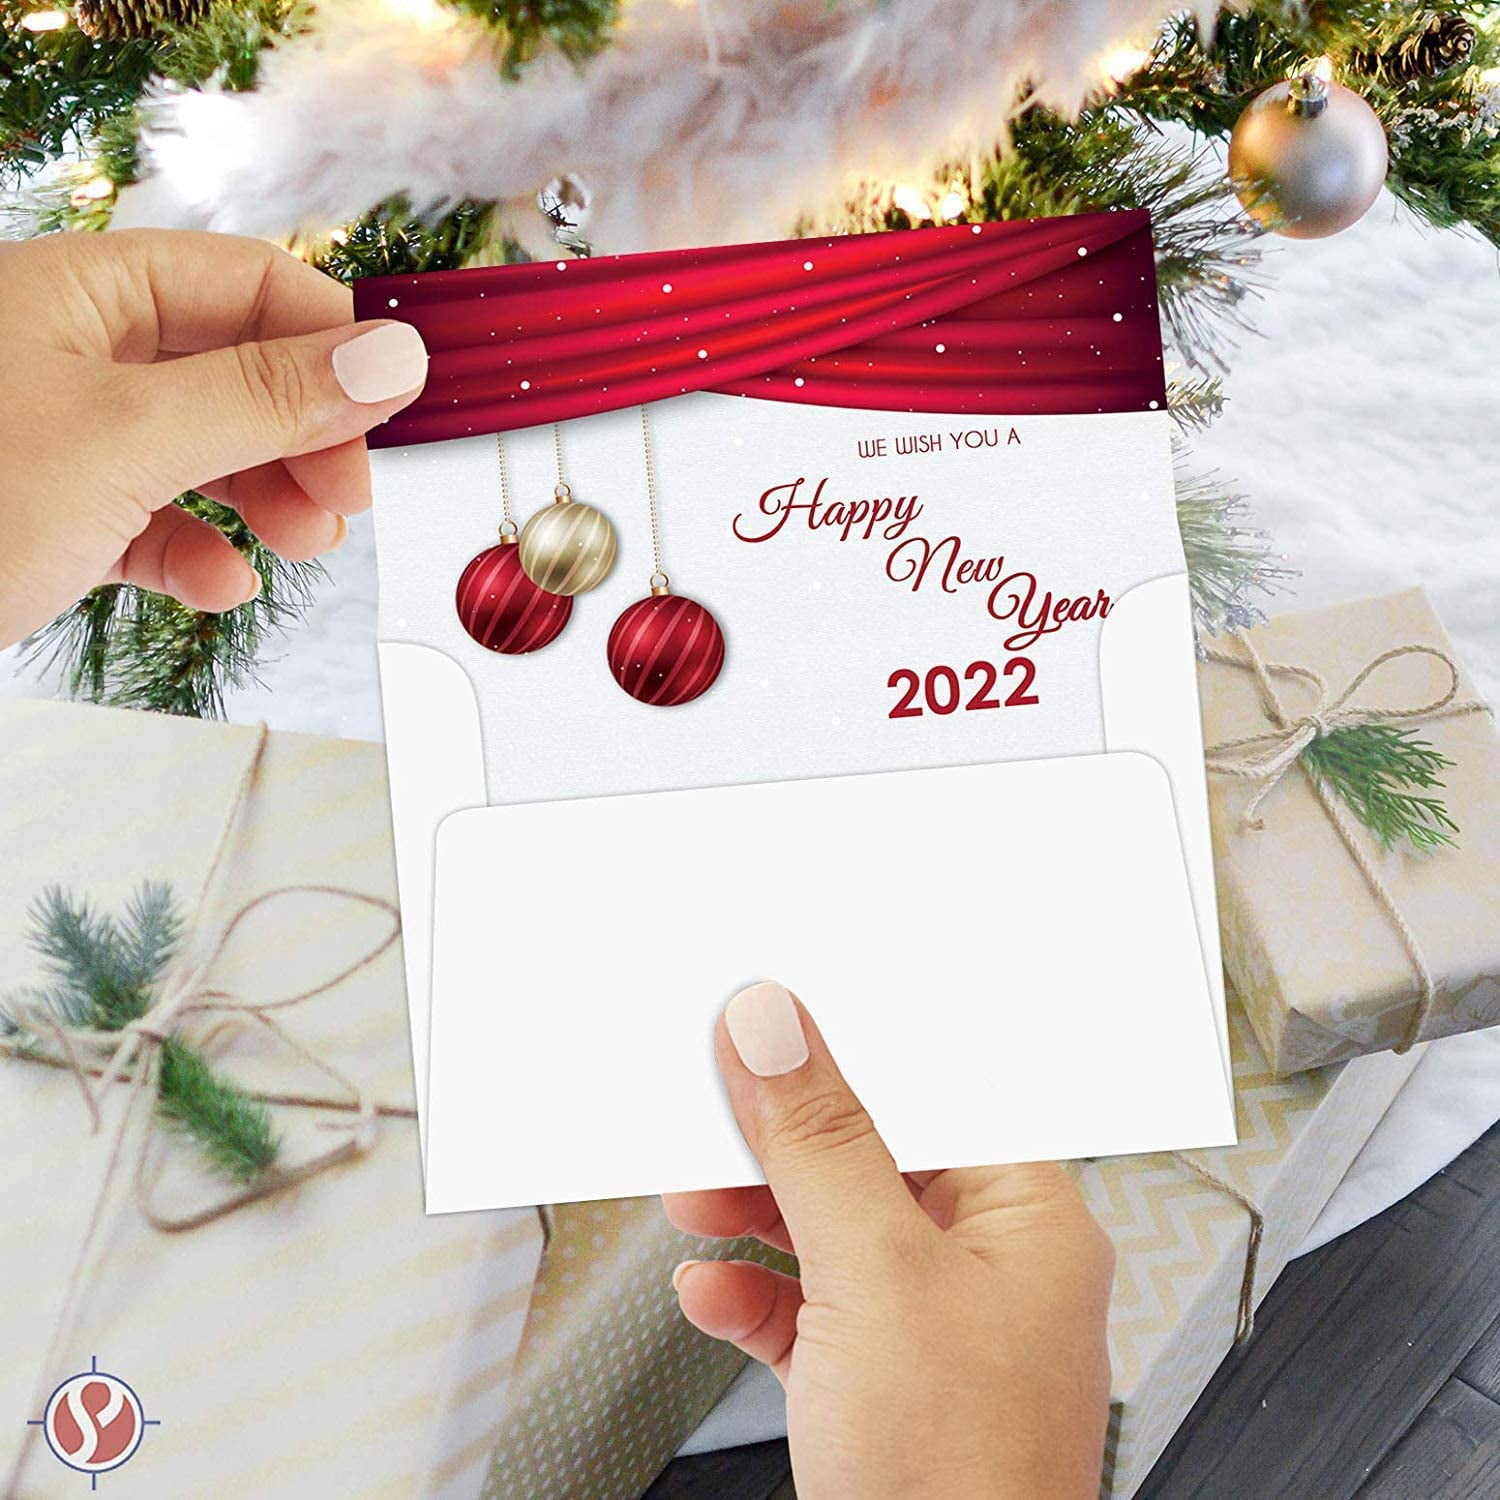 Details about  / 2022 /'Happy New Year/' Holiday Greeting Cards and Envelopes 25 Per Pack